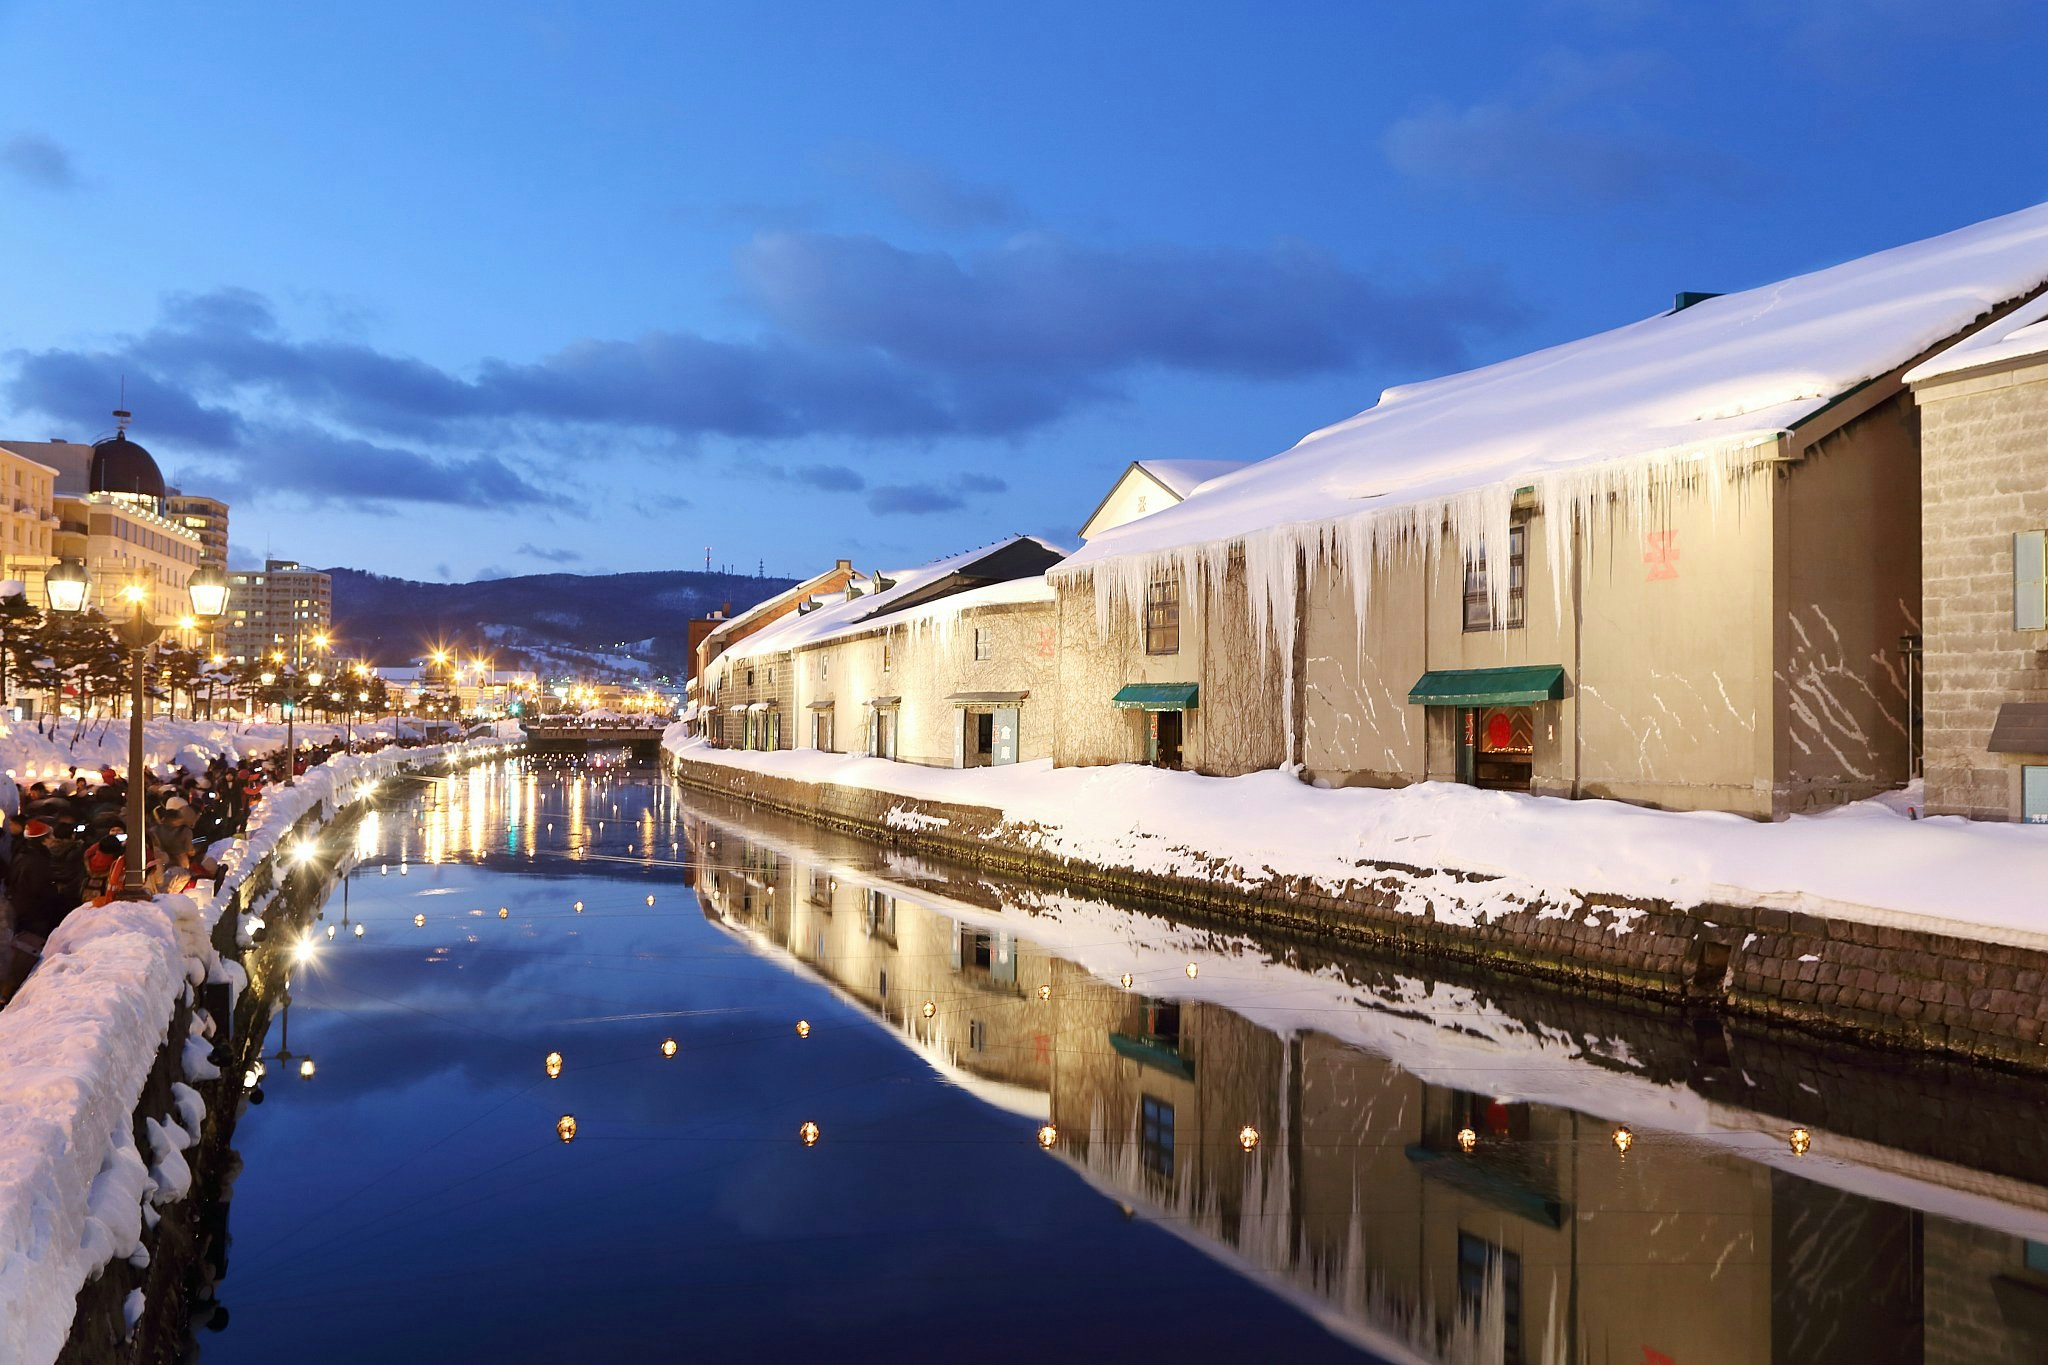 The illuminated canal of Otaru, Hokkaido, lined with snow-covered buildings, some of which are grand and imposing, at dusk.